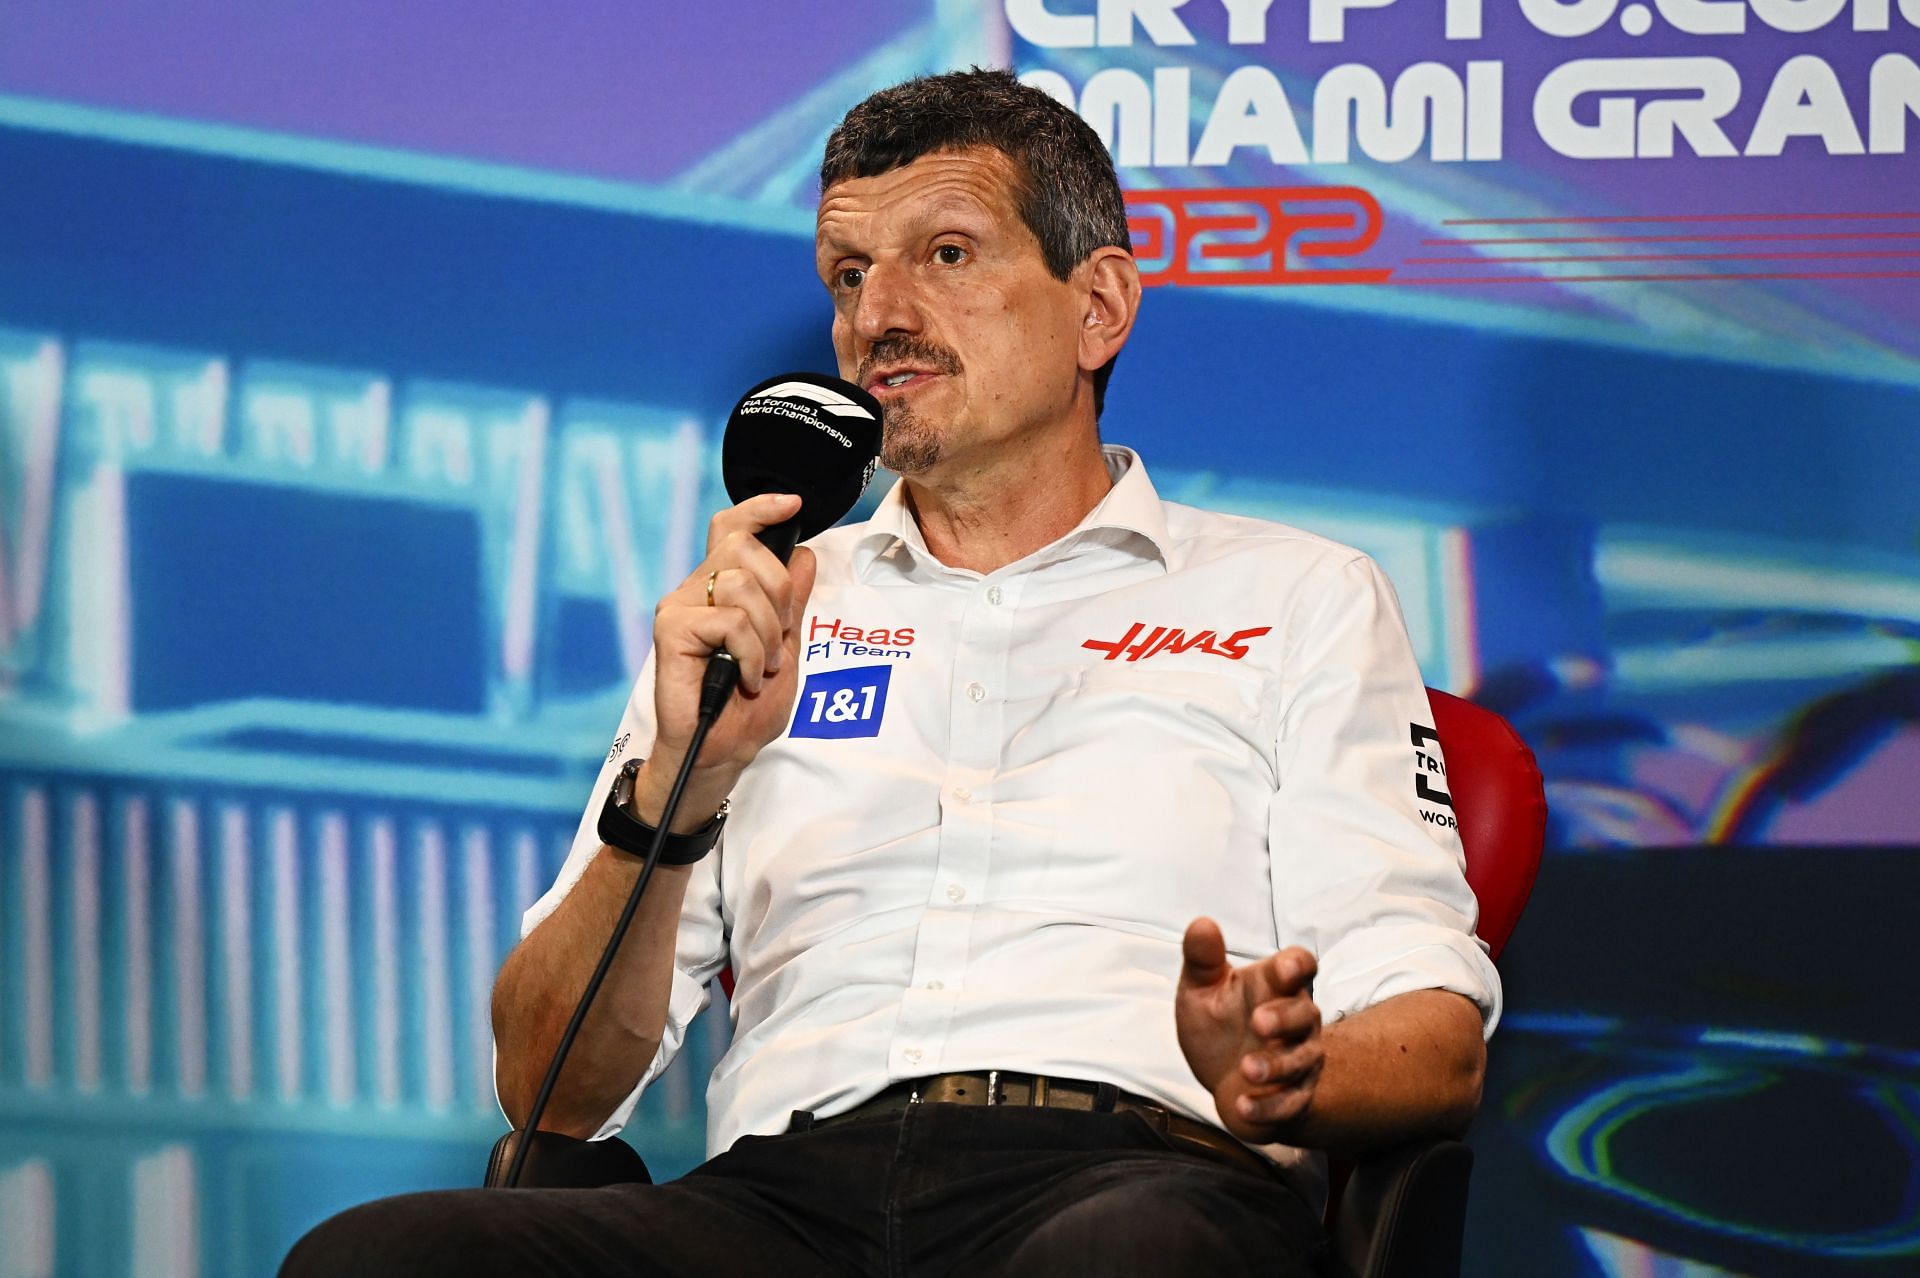 Guenther Steiner during the F1 Grand Prix of Miami - Final Practice